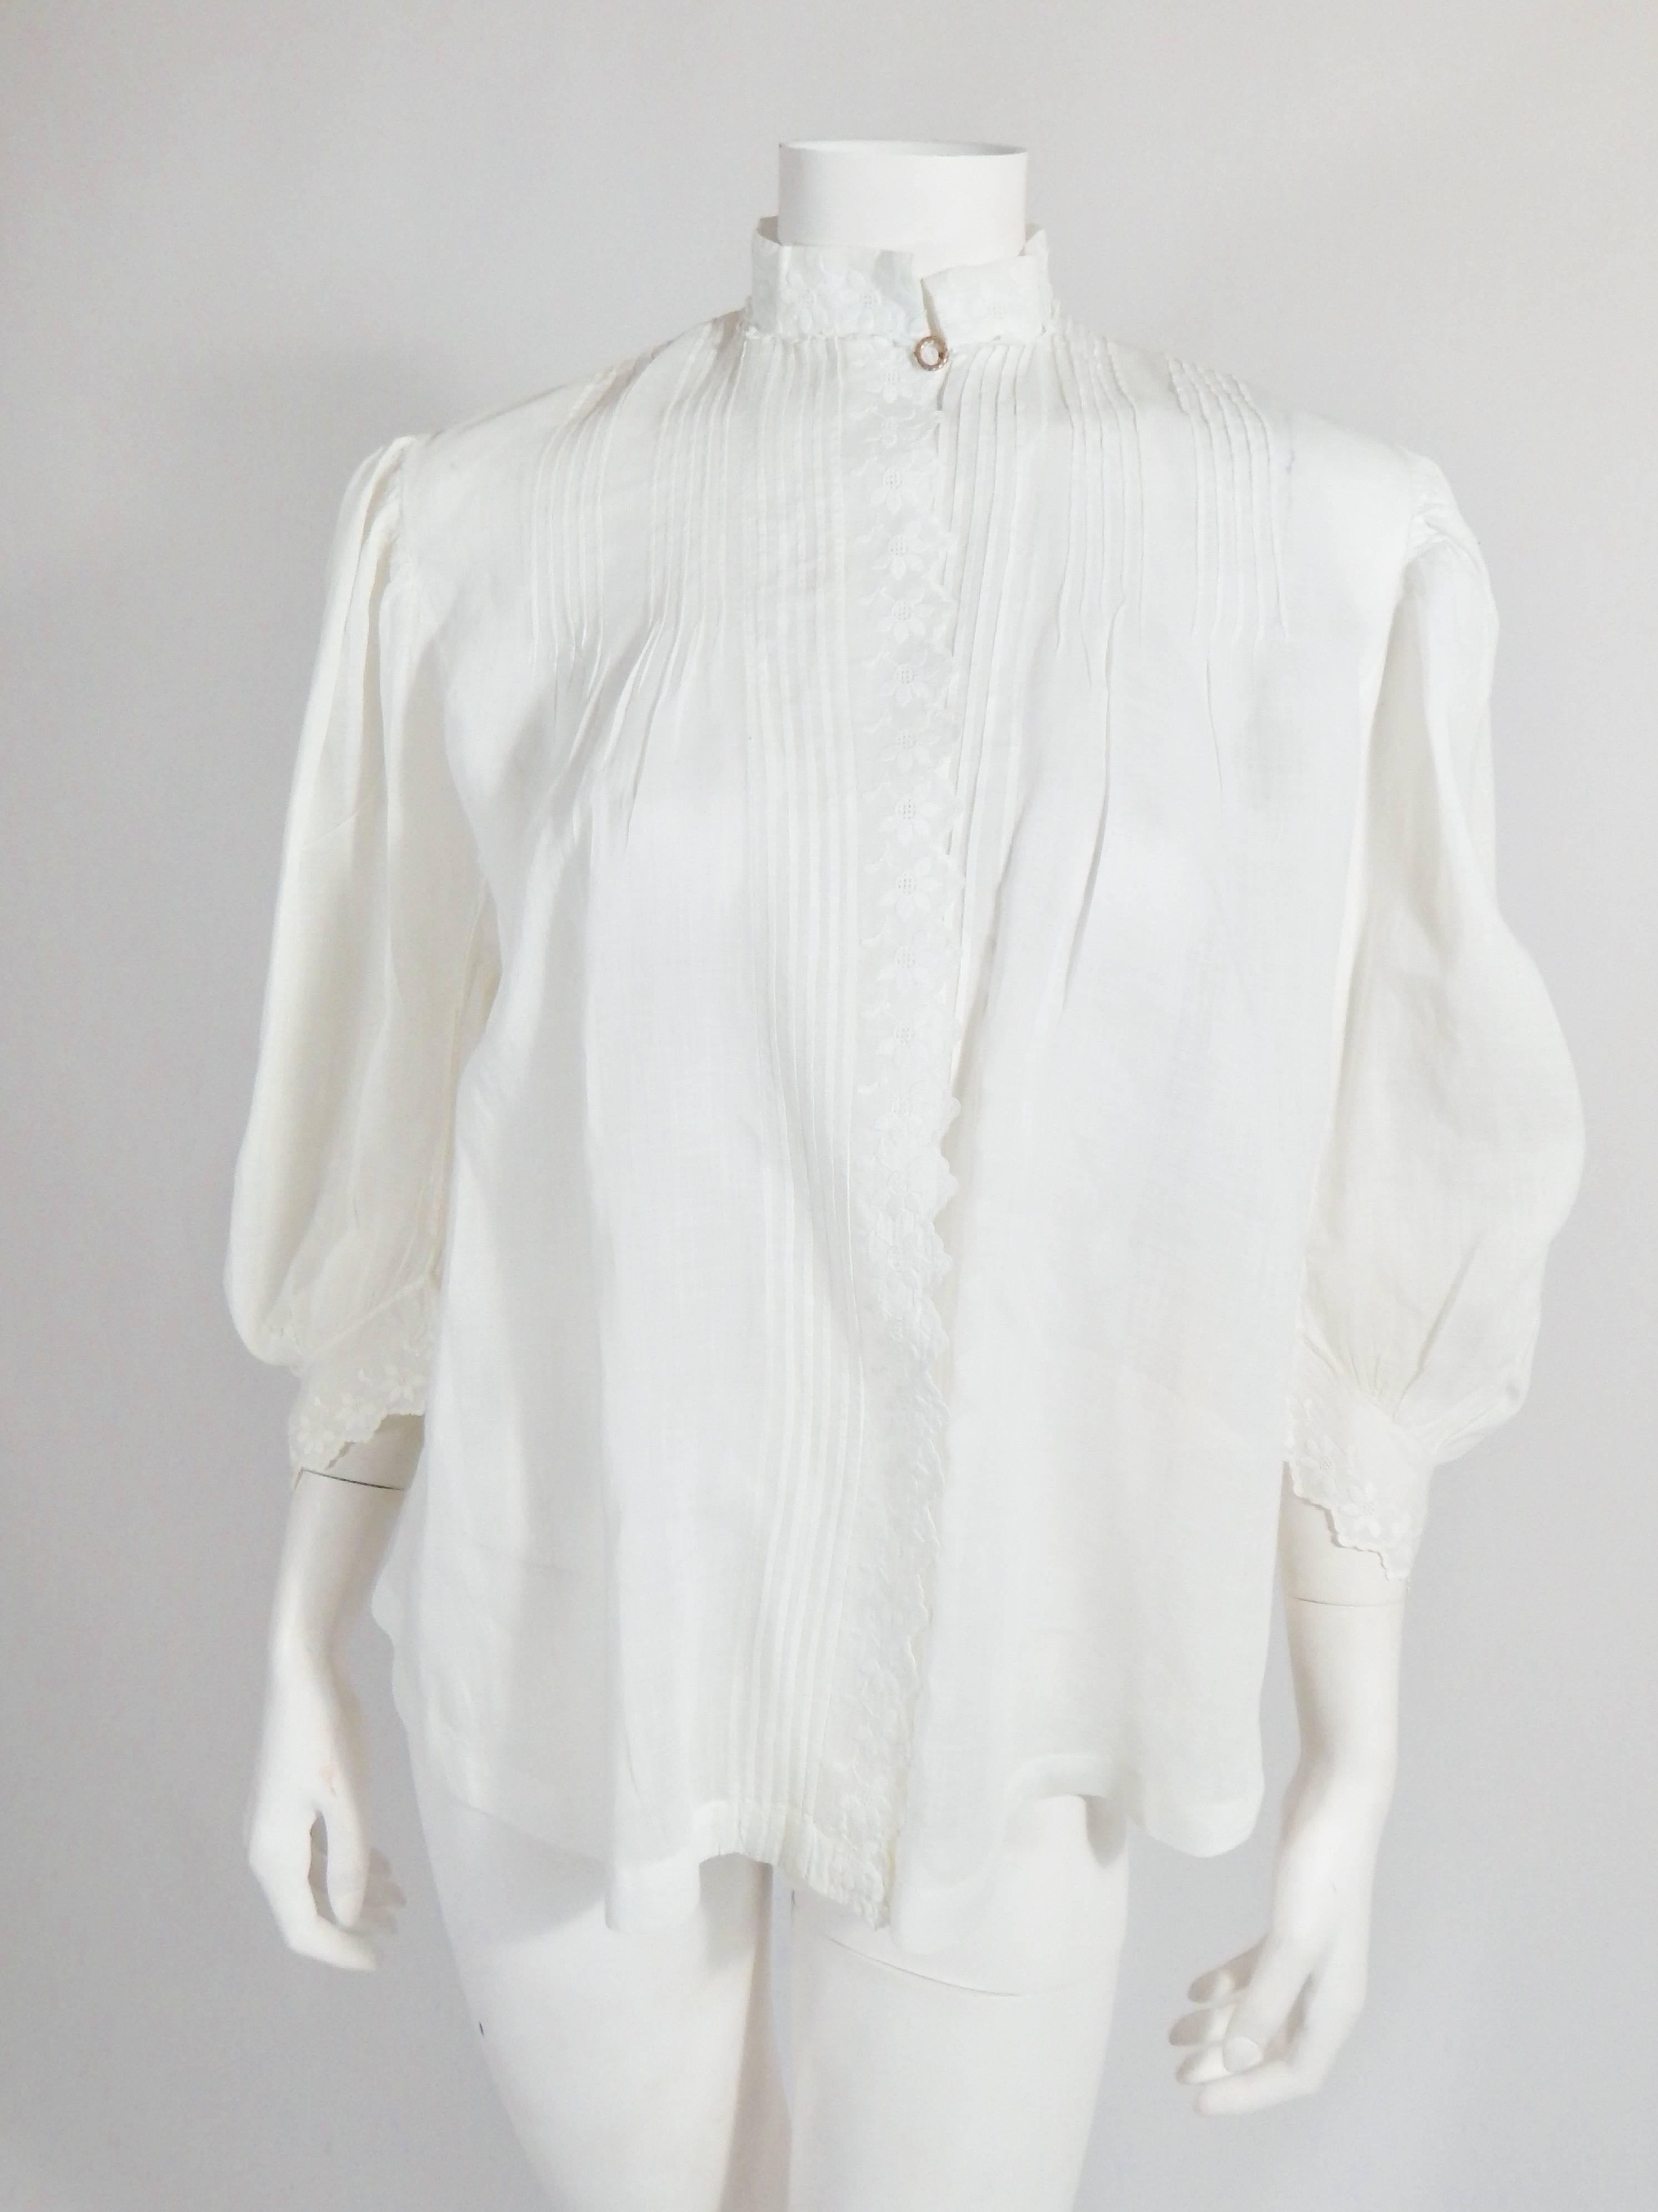 Lovely Edwardian Vintage Antique Blouse Made with Fine White Cotton and White Embroidery. Pleated Shoulders. Embroidered detail on Collar, sleeves and down front. The special detail is that it still has the original Edwardian pin for the Collar.